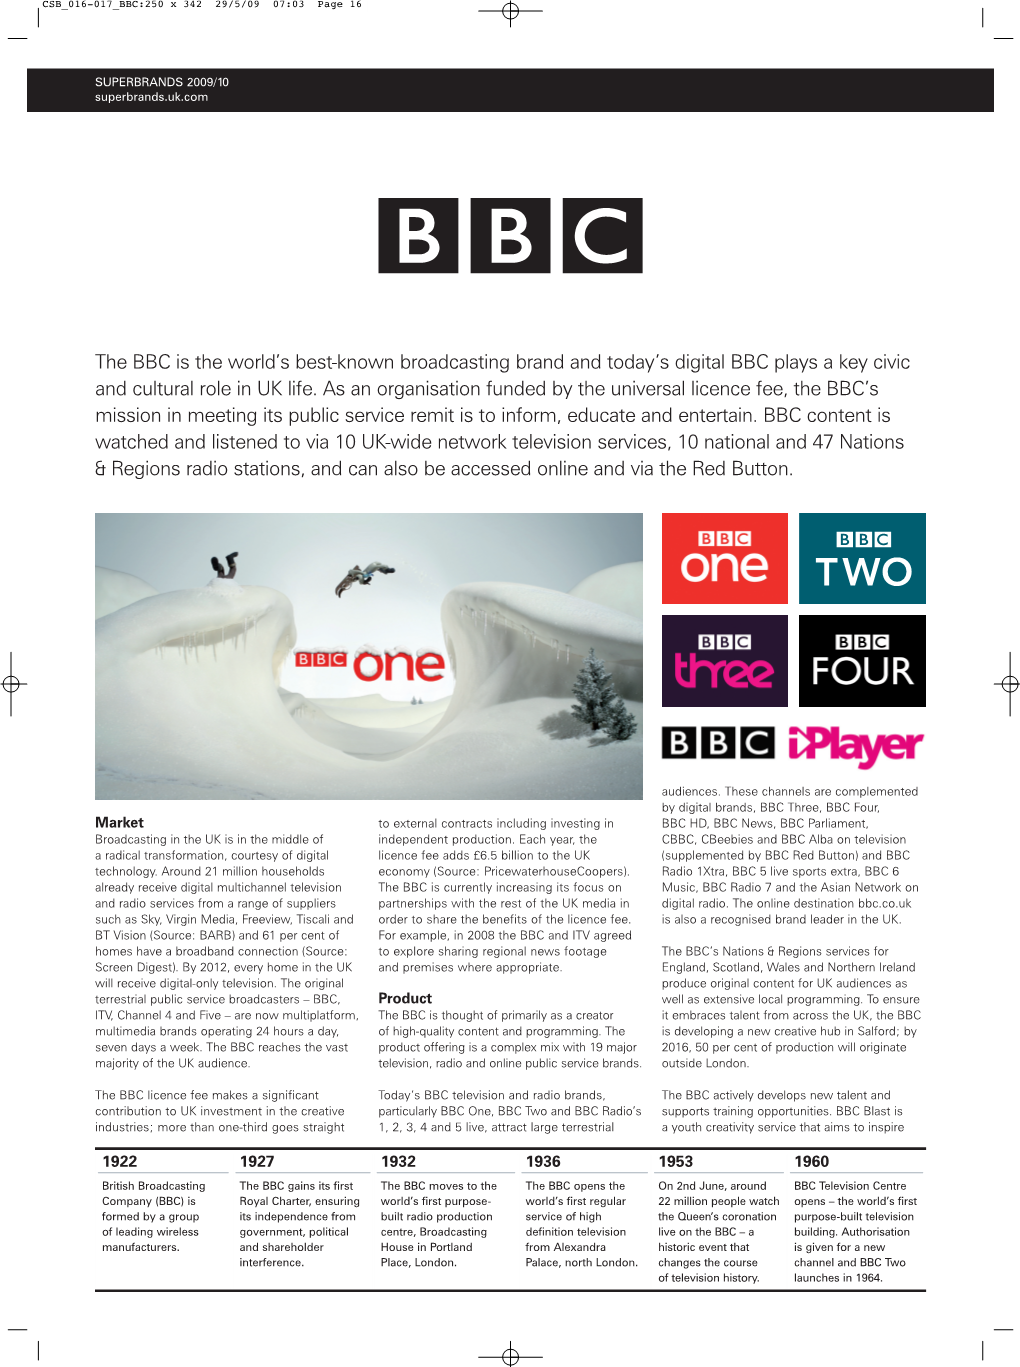 The BBC Is the World's Best-Known Broadcasting Brand and Today's